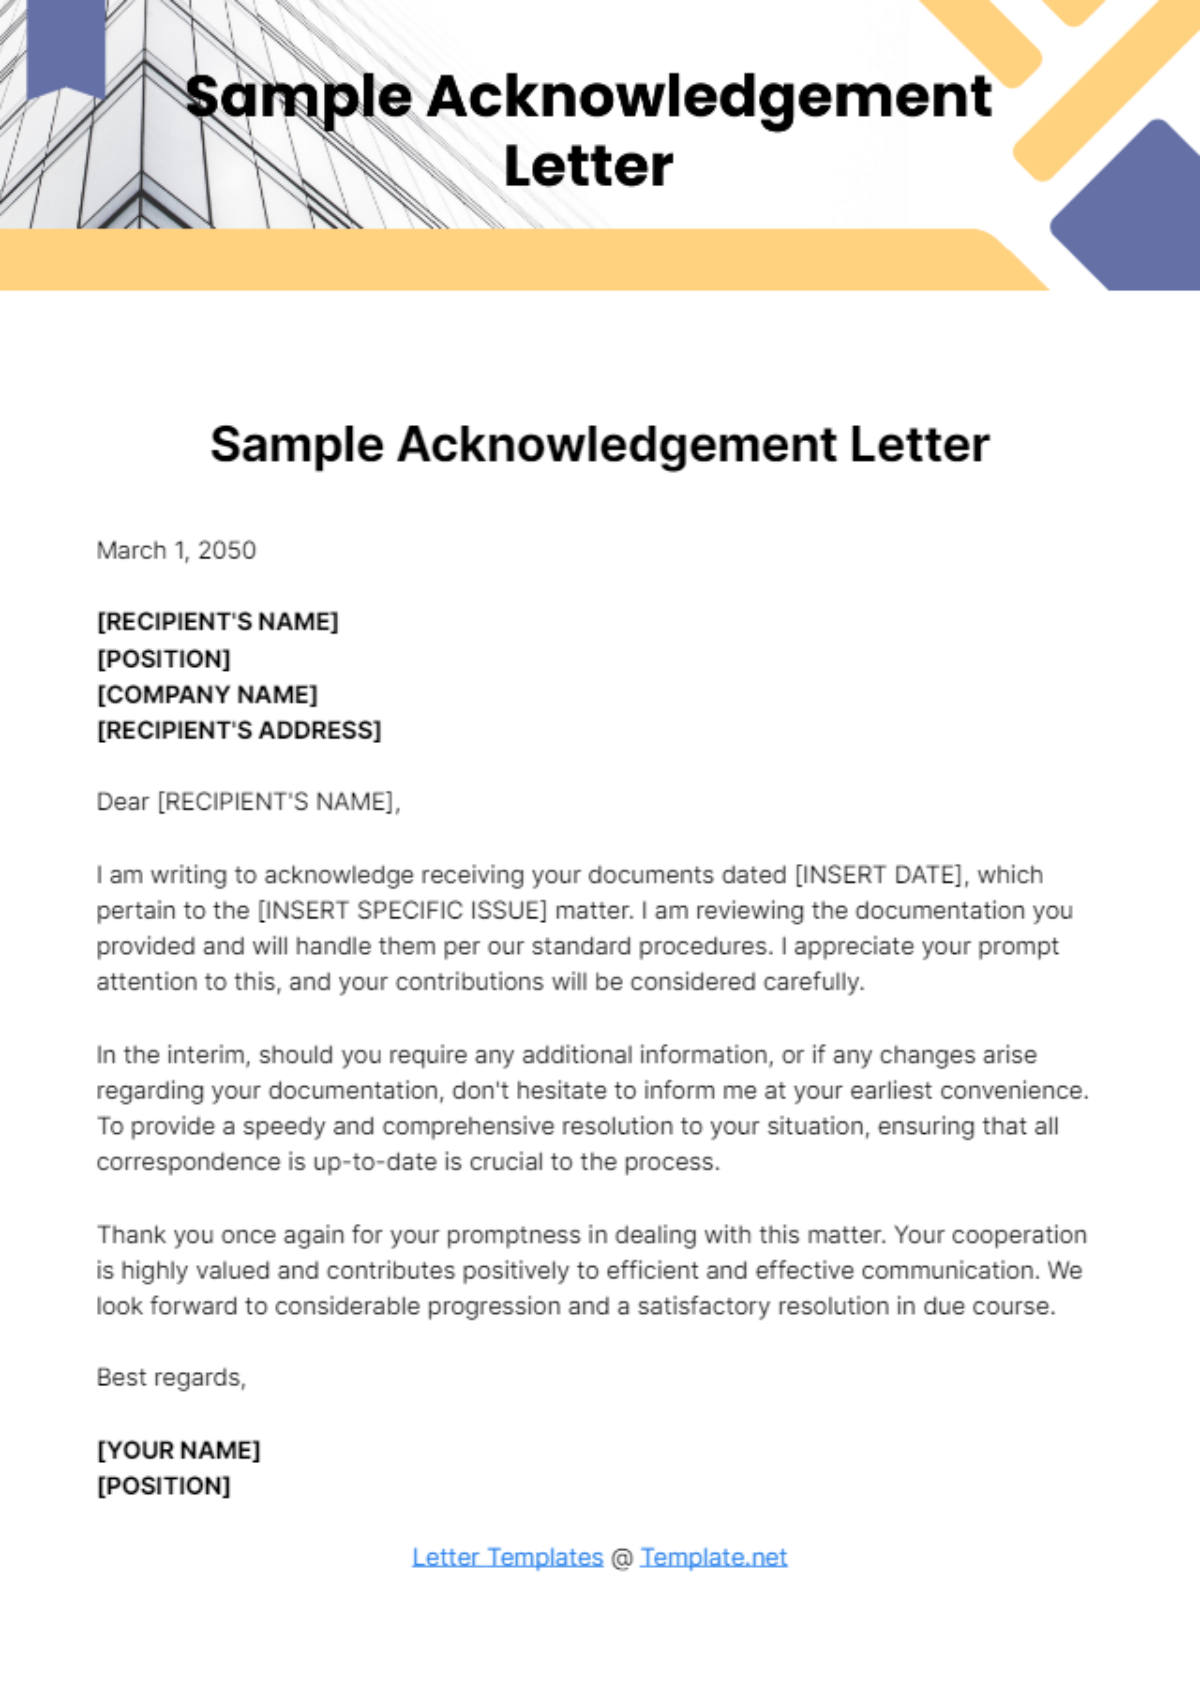 Free Sample Acknowledgement Letter Template